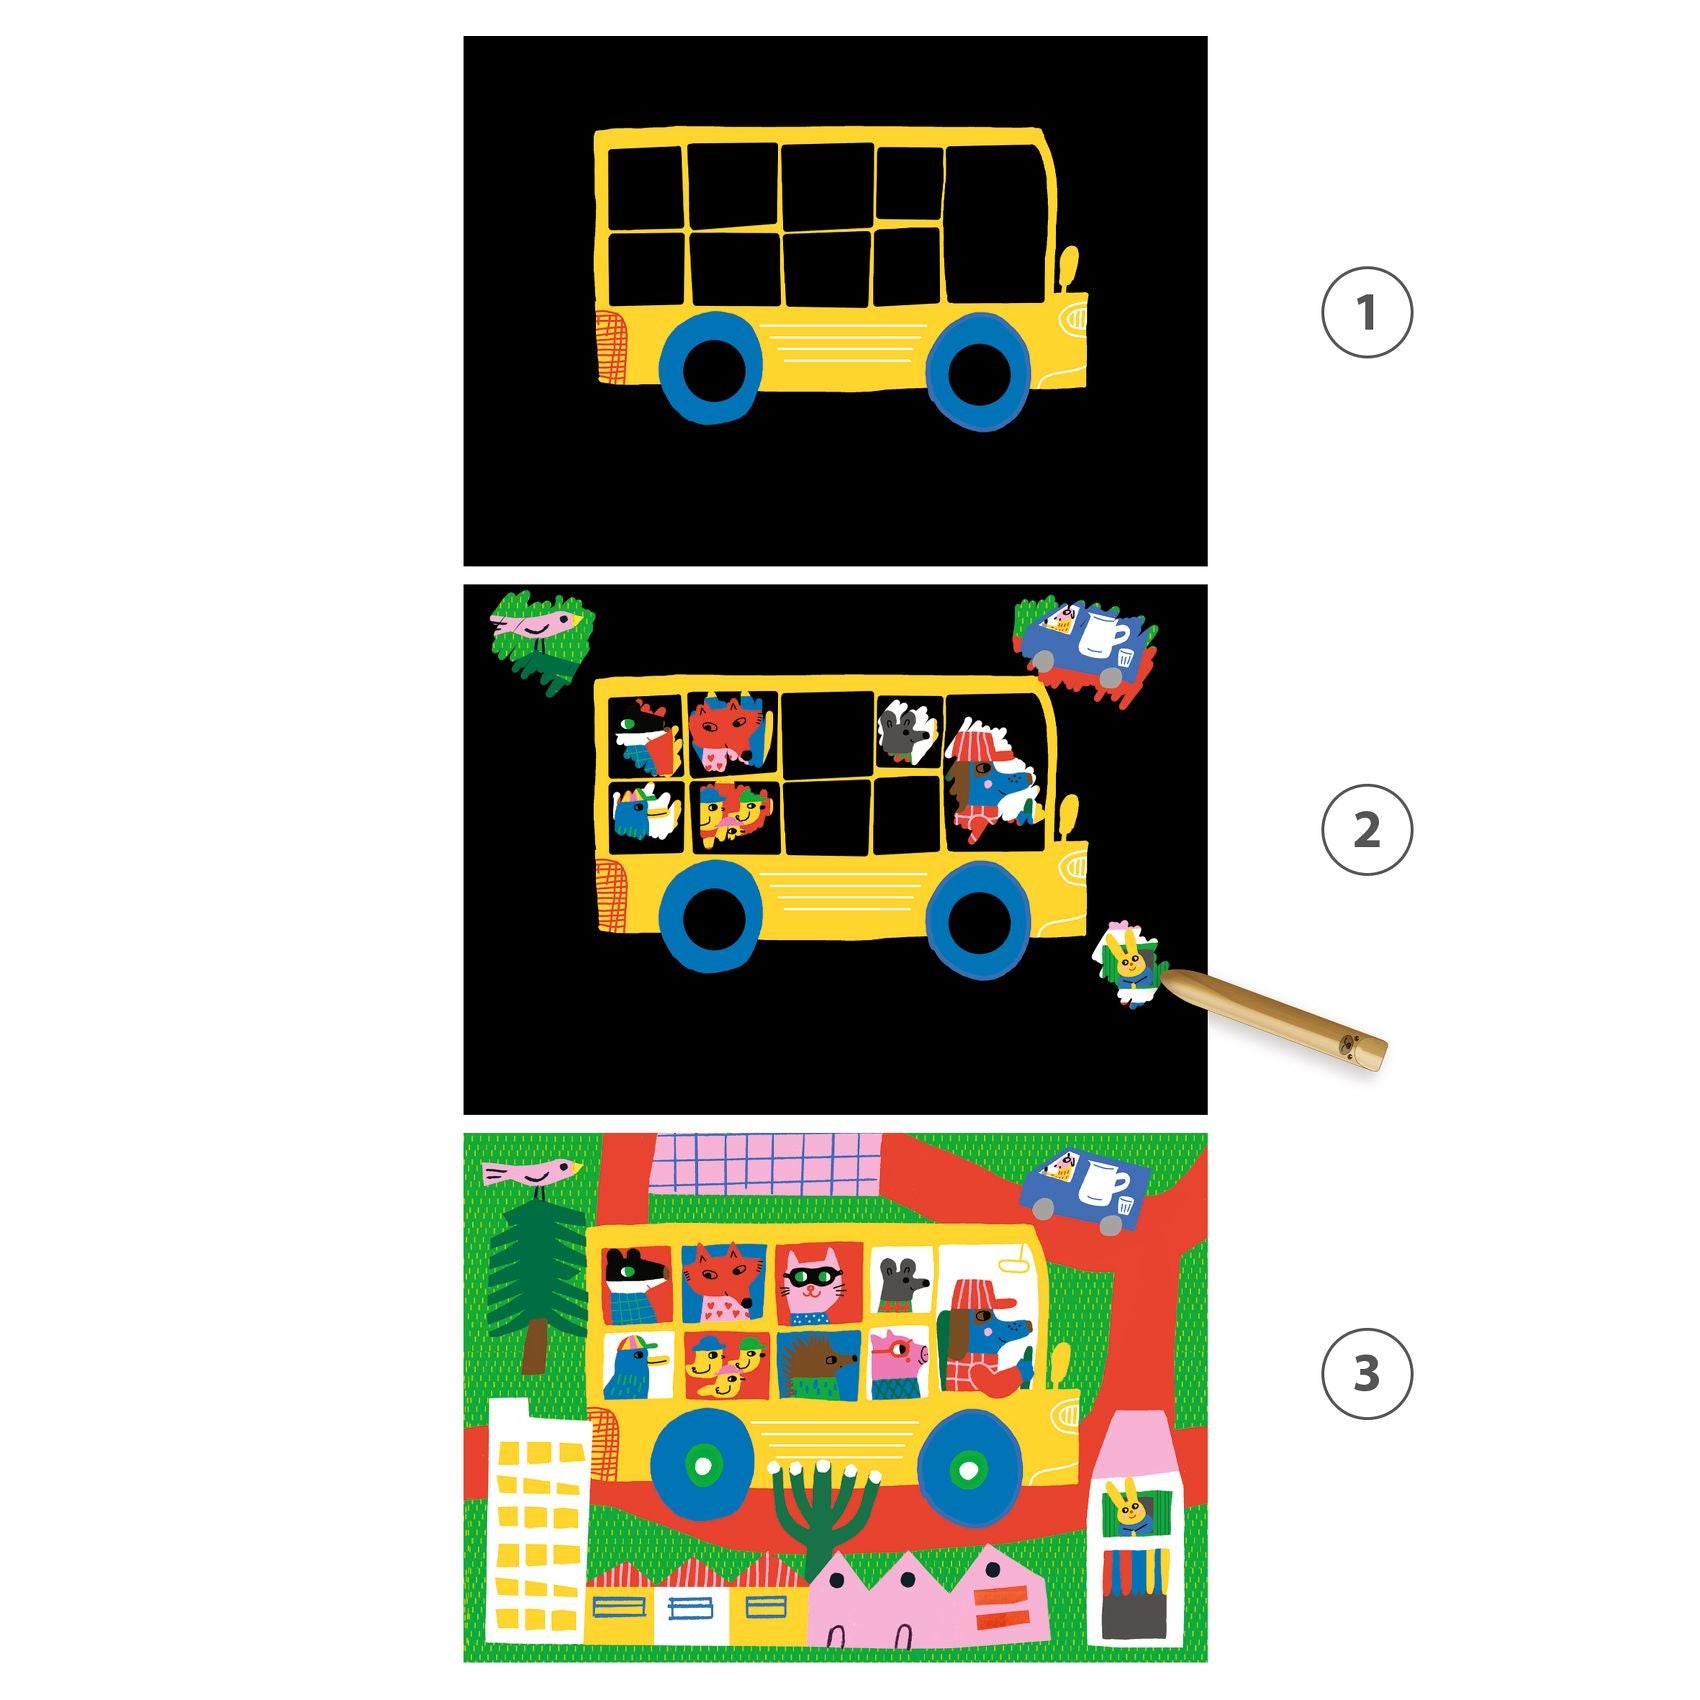 Djeco Djeco Scratch Cards For Little Ones - Learning about vehicles - Pearls & Swines